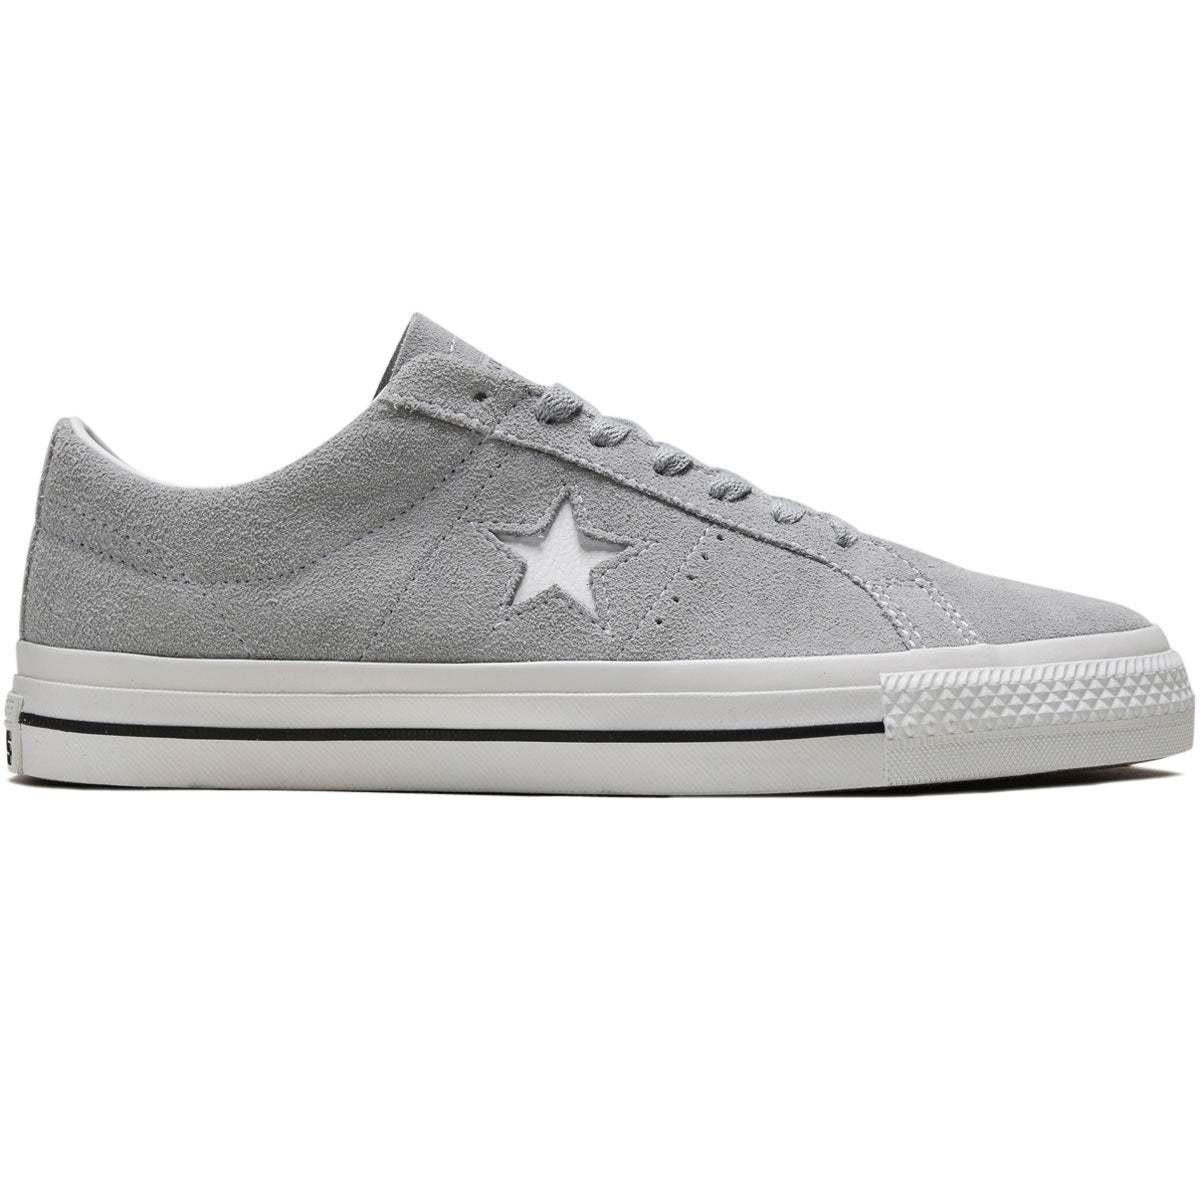 Converse One Star Pro Shoes - Wolf Grey/White/Black image 1